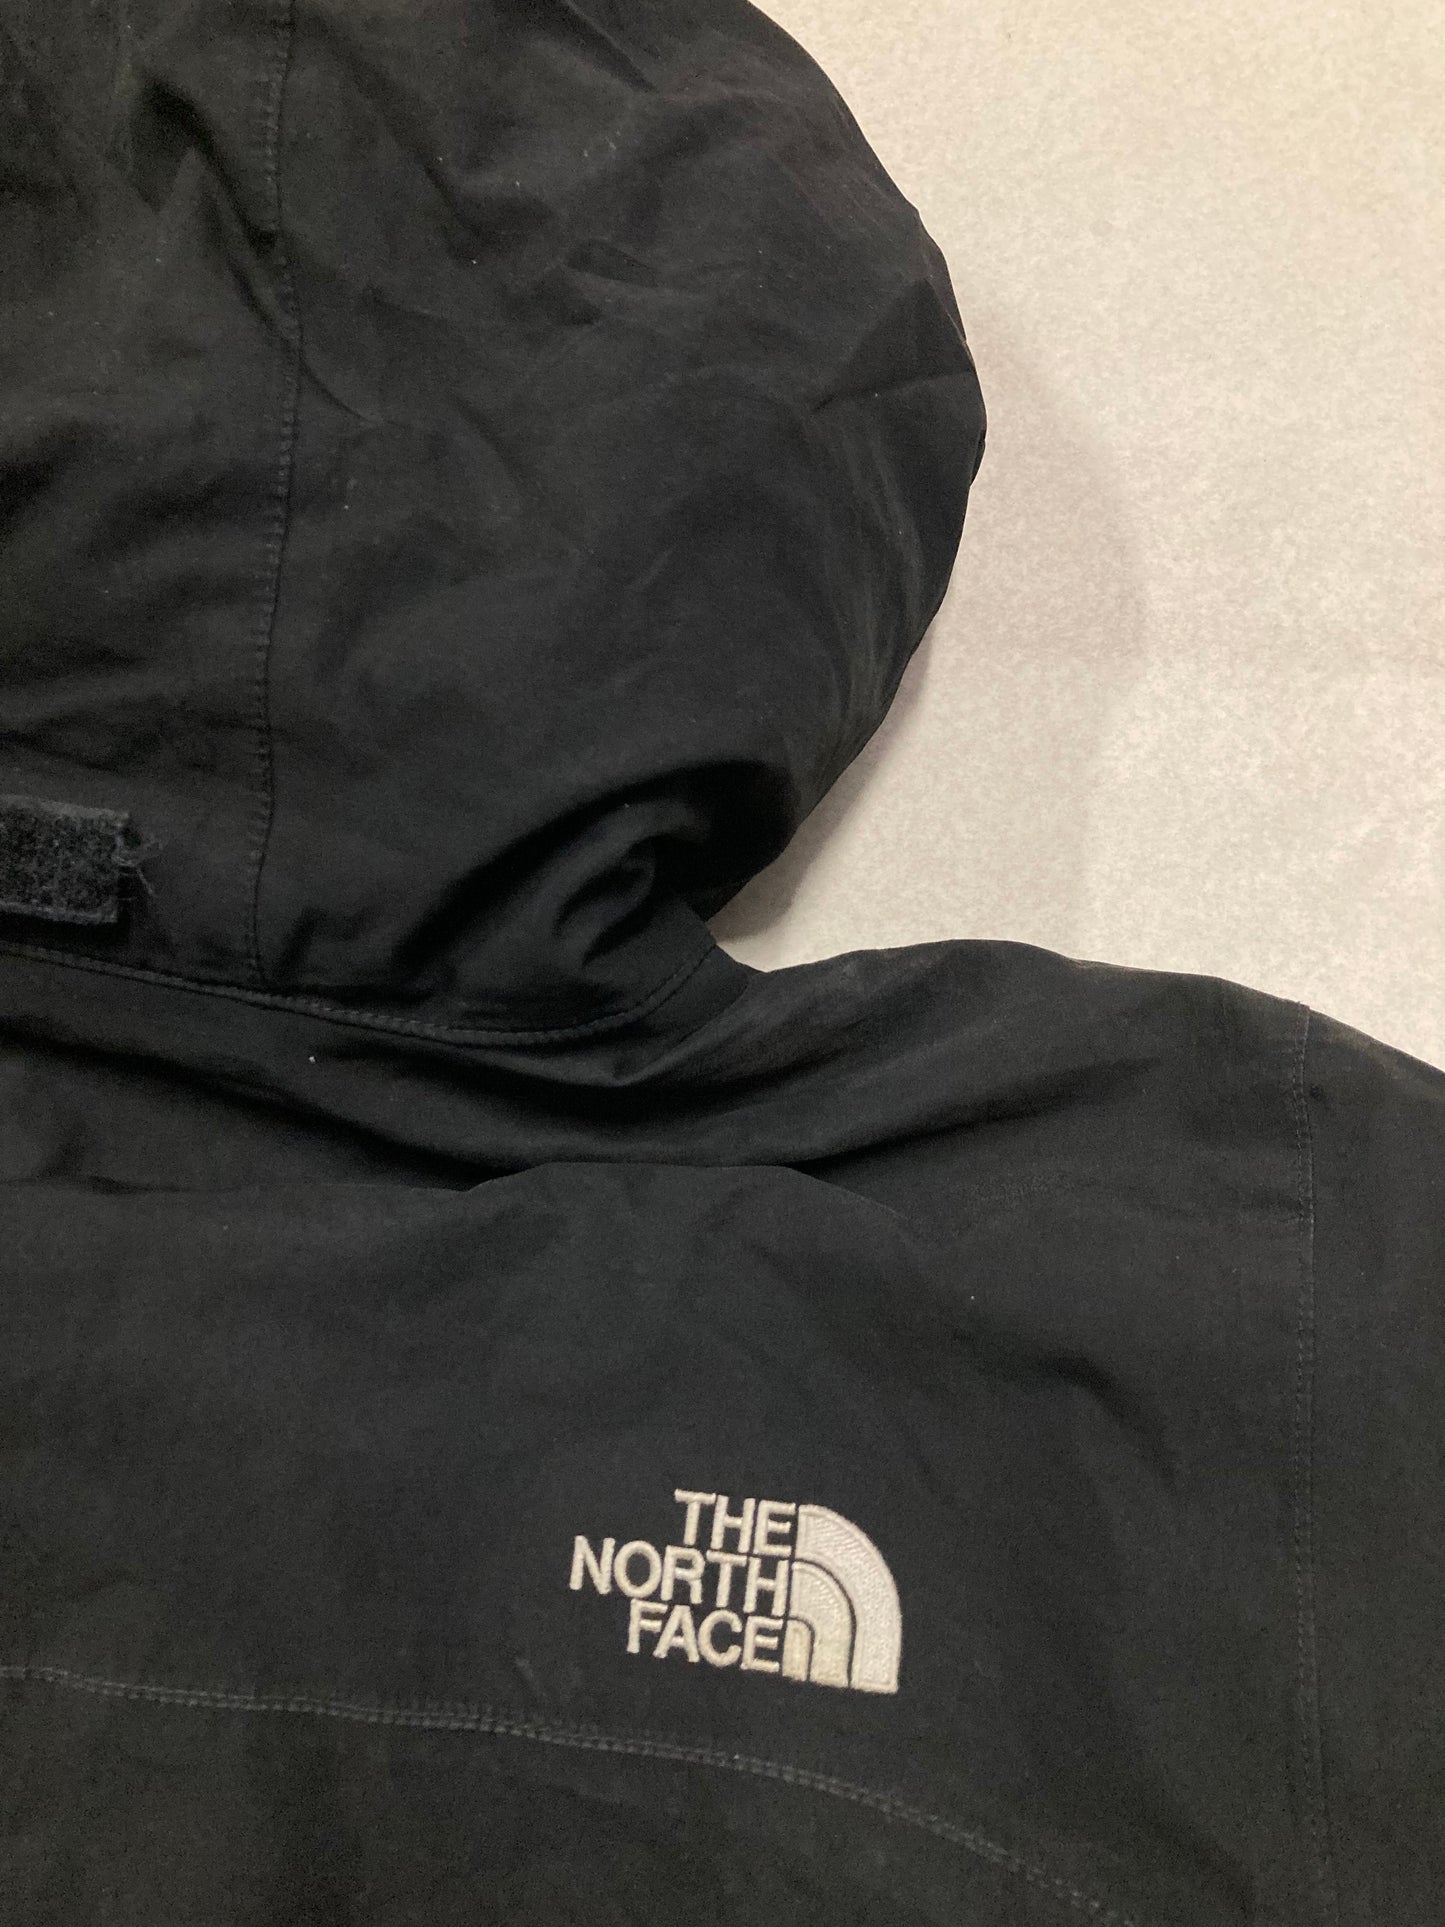 Chaqueta The North Face Hy Vent 2014 - M